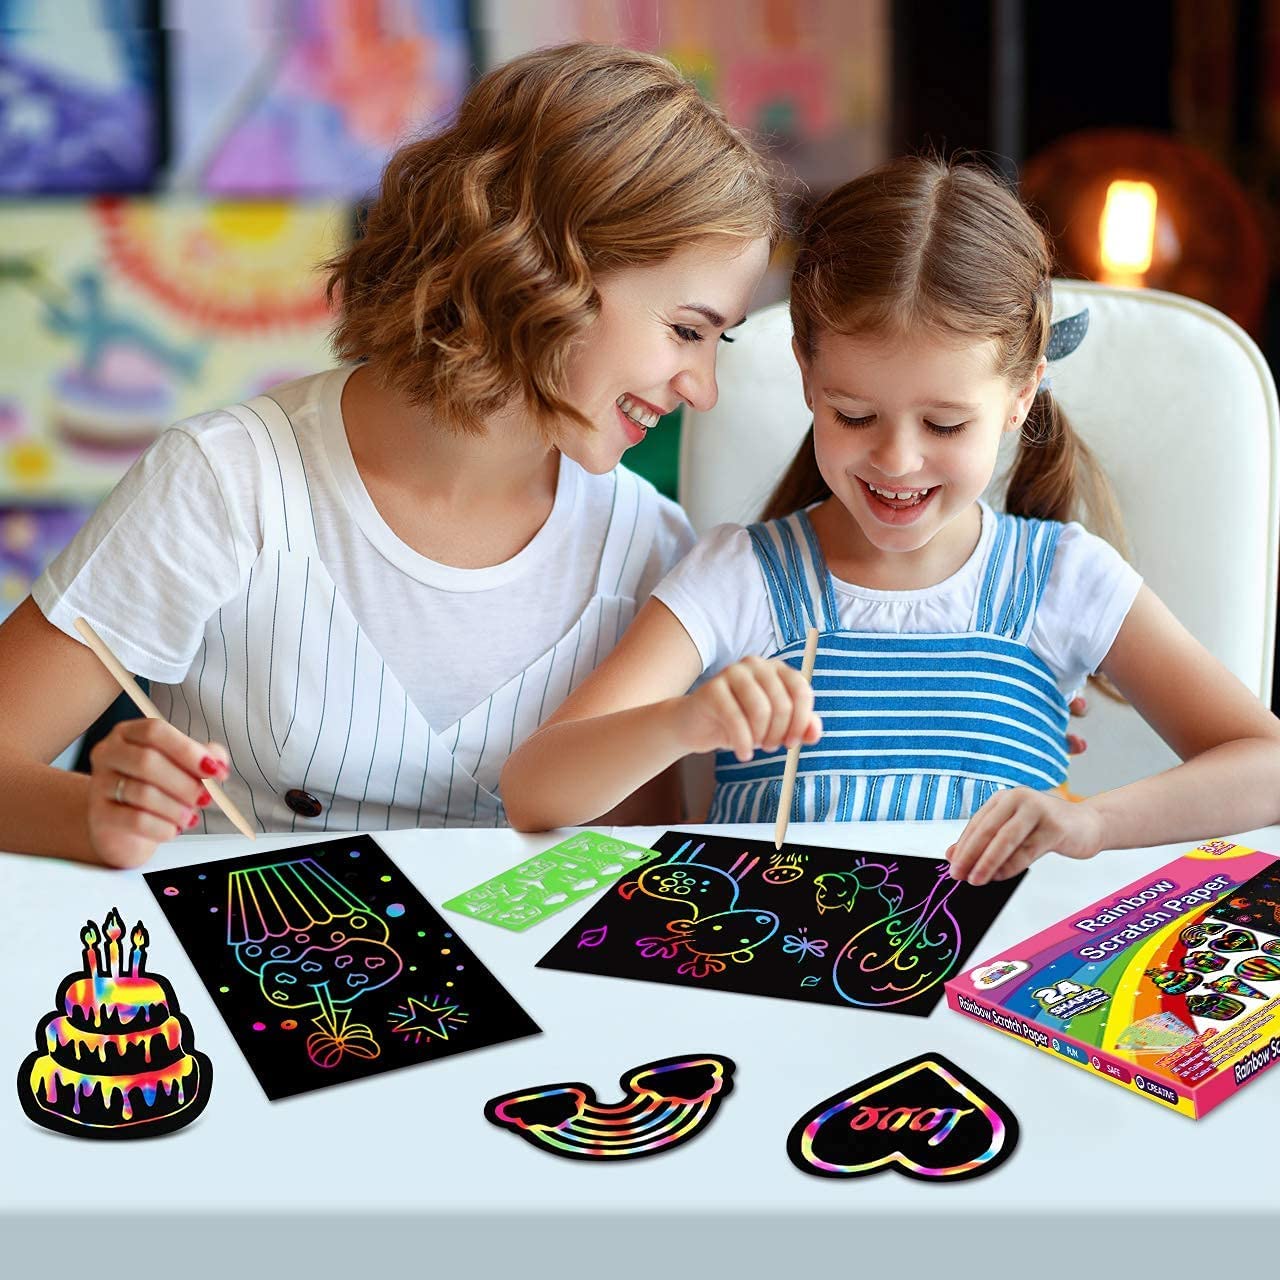 ZMLM Scratch Paper Art-Craft Christmas Girl: Rainbow Scratch Magic Drawing Set Paper Pad Board Supply Kit Girl Project Activity for 3-12 Age Kid Game Toy Holiday|Party |Birthday|Children's Day Gift